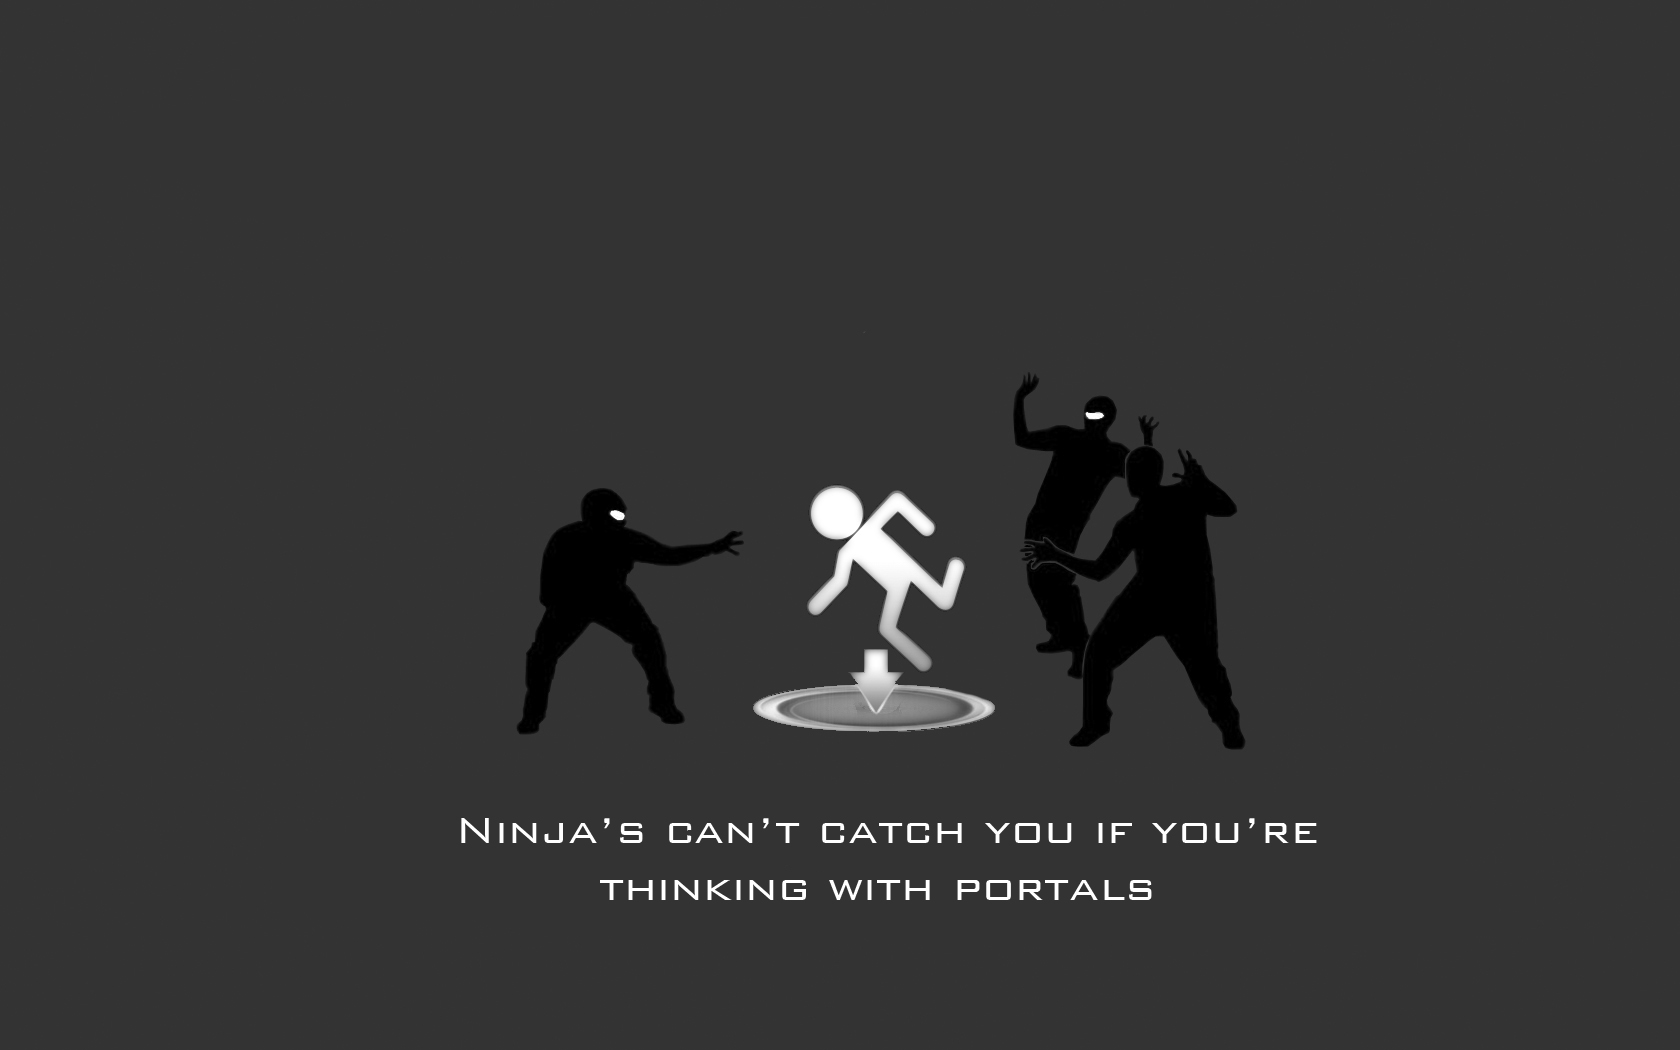 A humorous ninja character from a video game, ready to entertain your desktop.